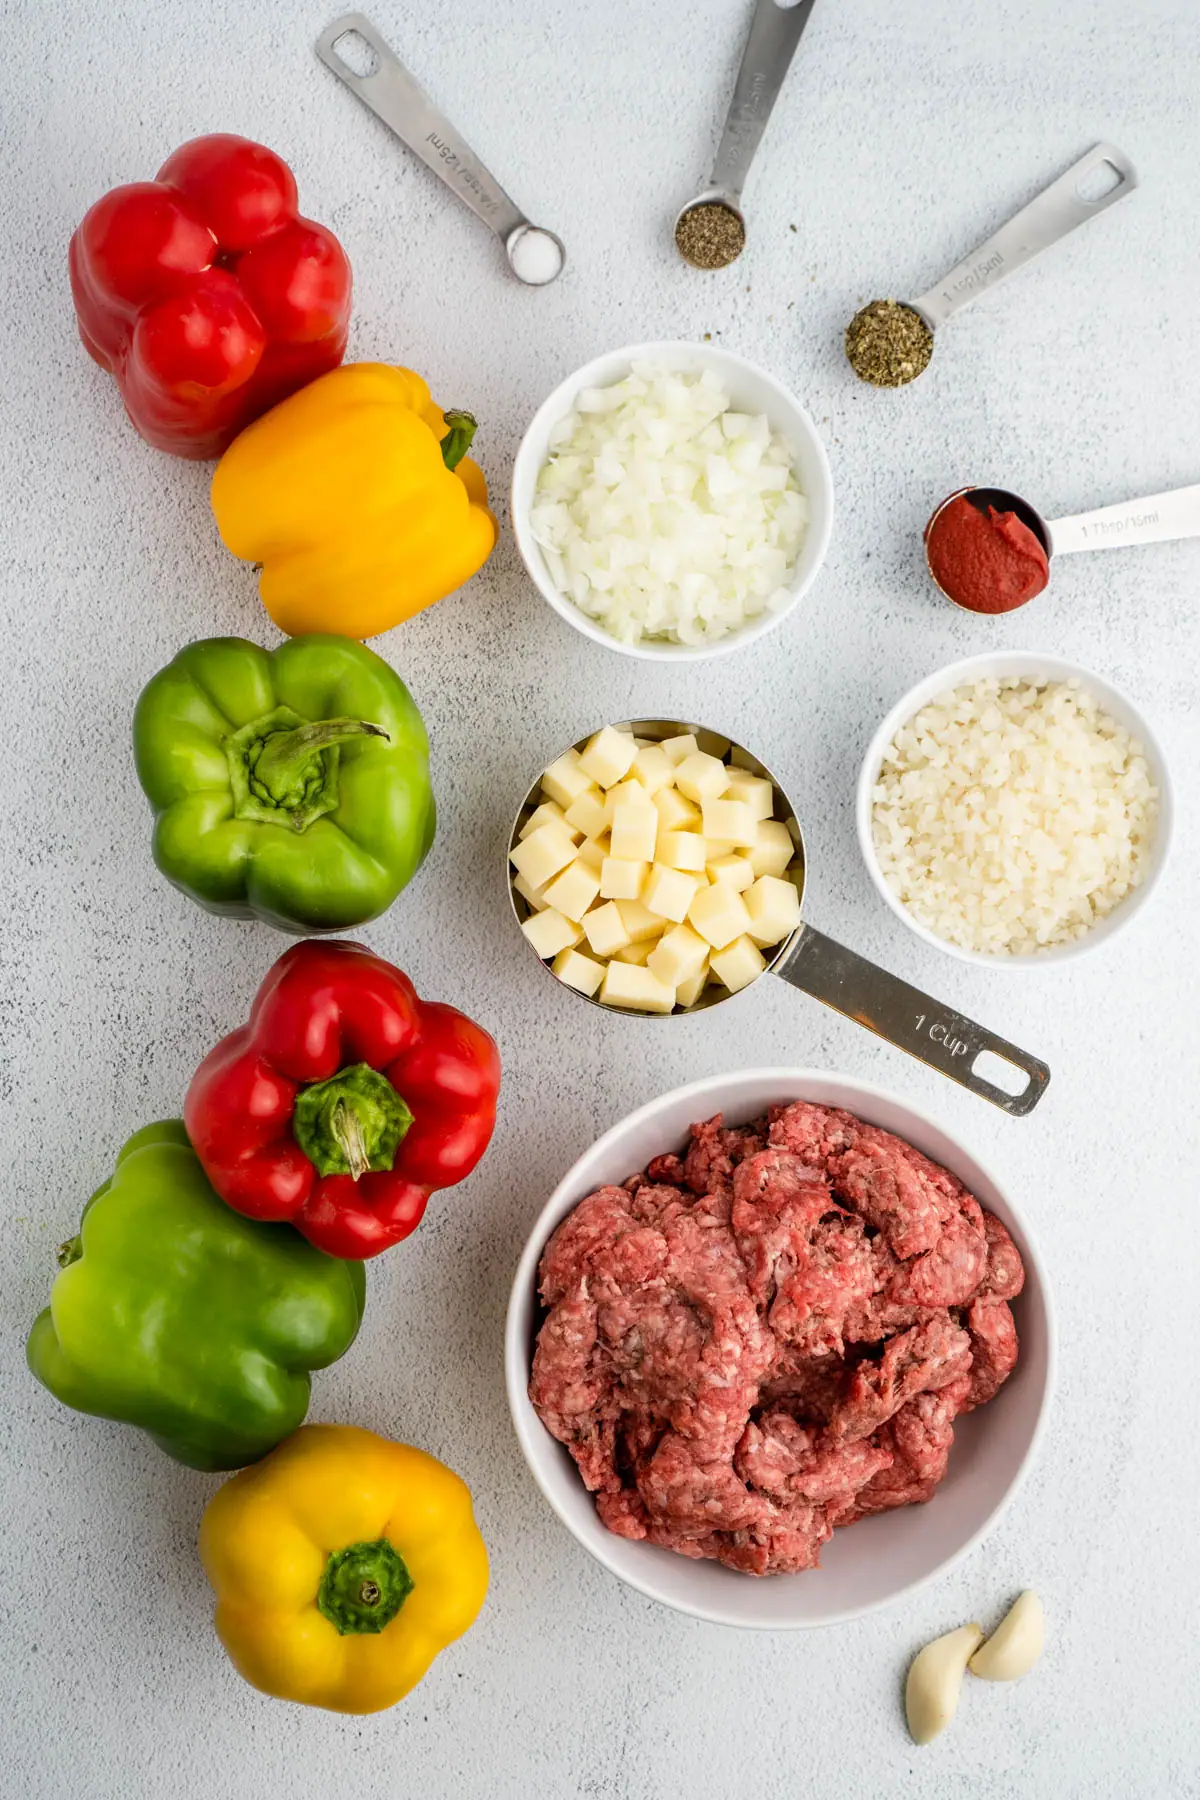 Ingredients to make the recipe, including green, red, and yellow bell peppers, salt, pepper, Italian seasoning, tomato paste, riced cauliflower, onions, mozzarella cheese, ground beef, and garlic.